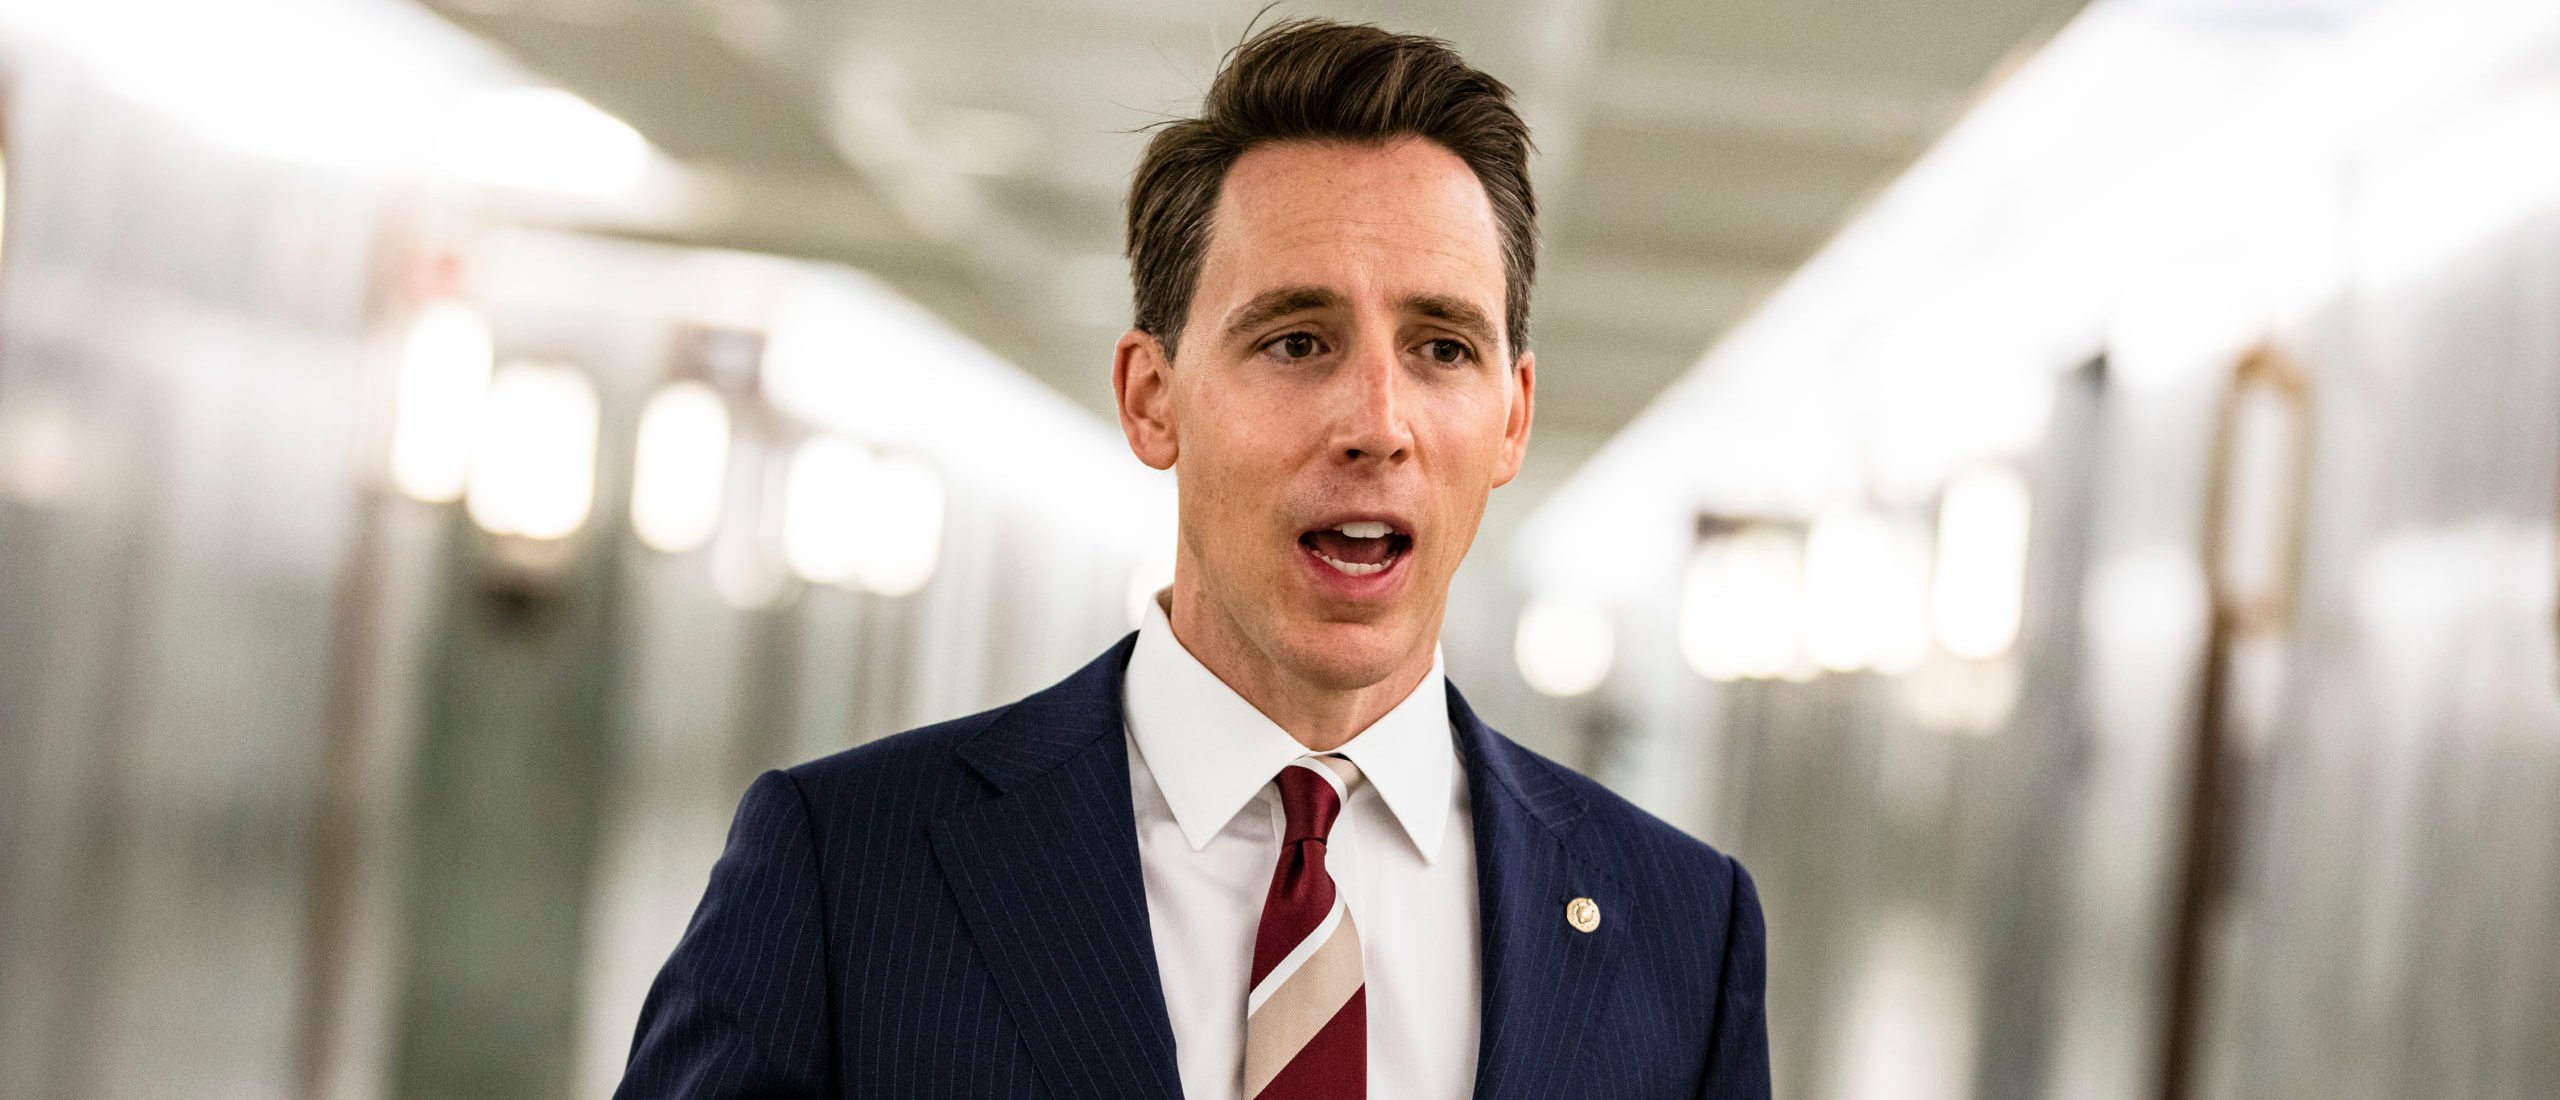 Walmart Called Josh Hawley A ‘Sore Loser’ On Twitter, Then Deleted It | The Daily Caller